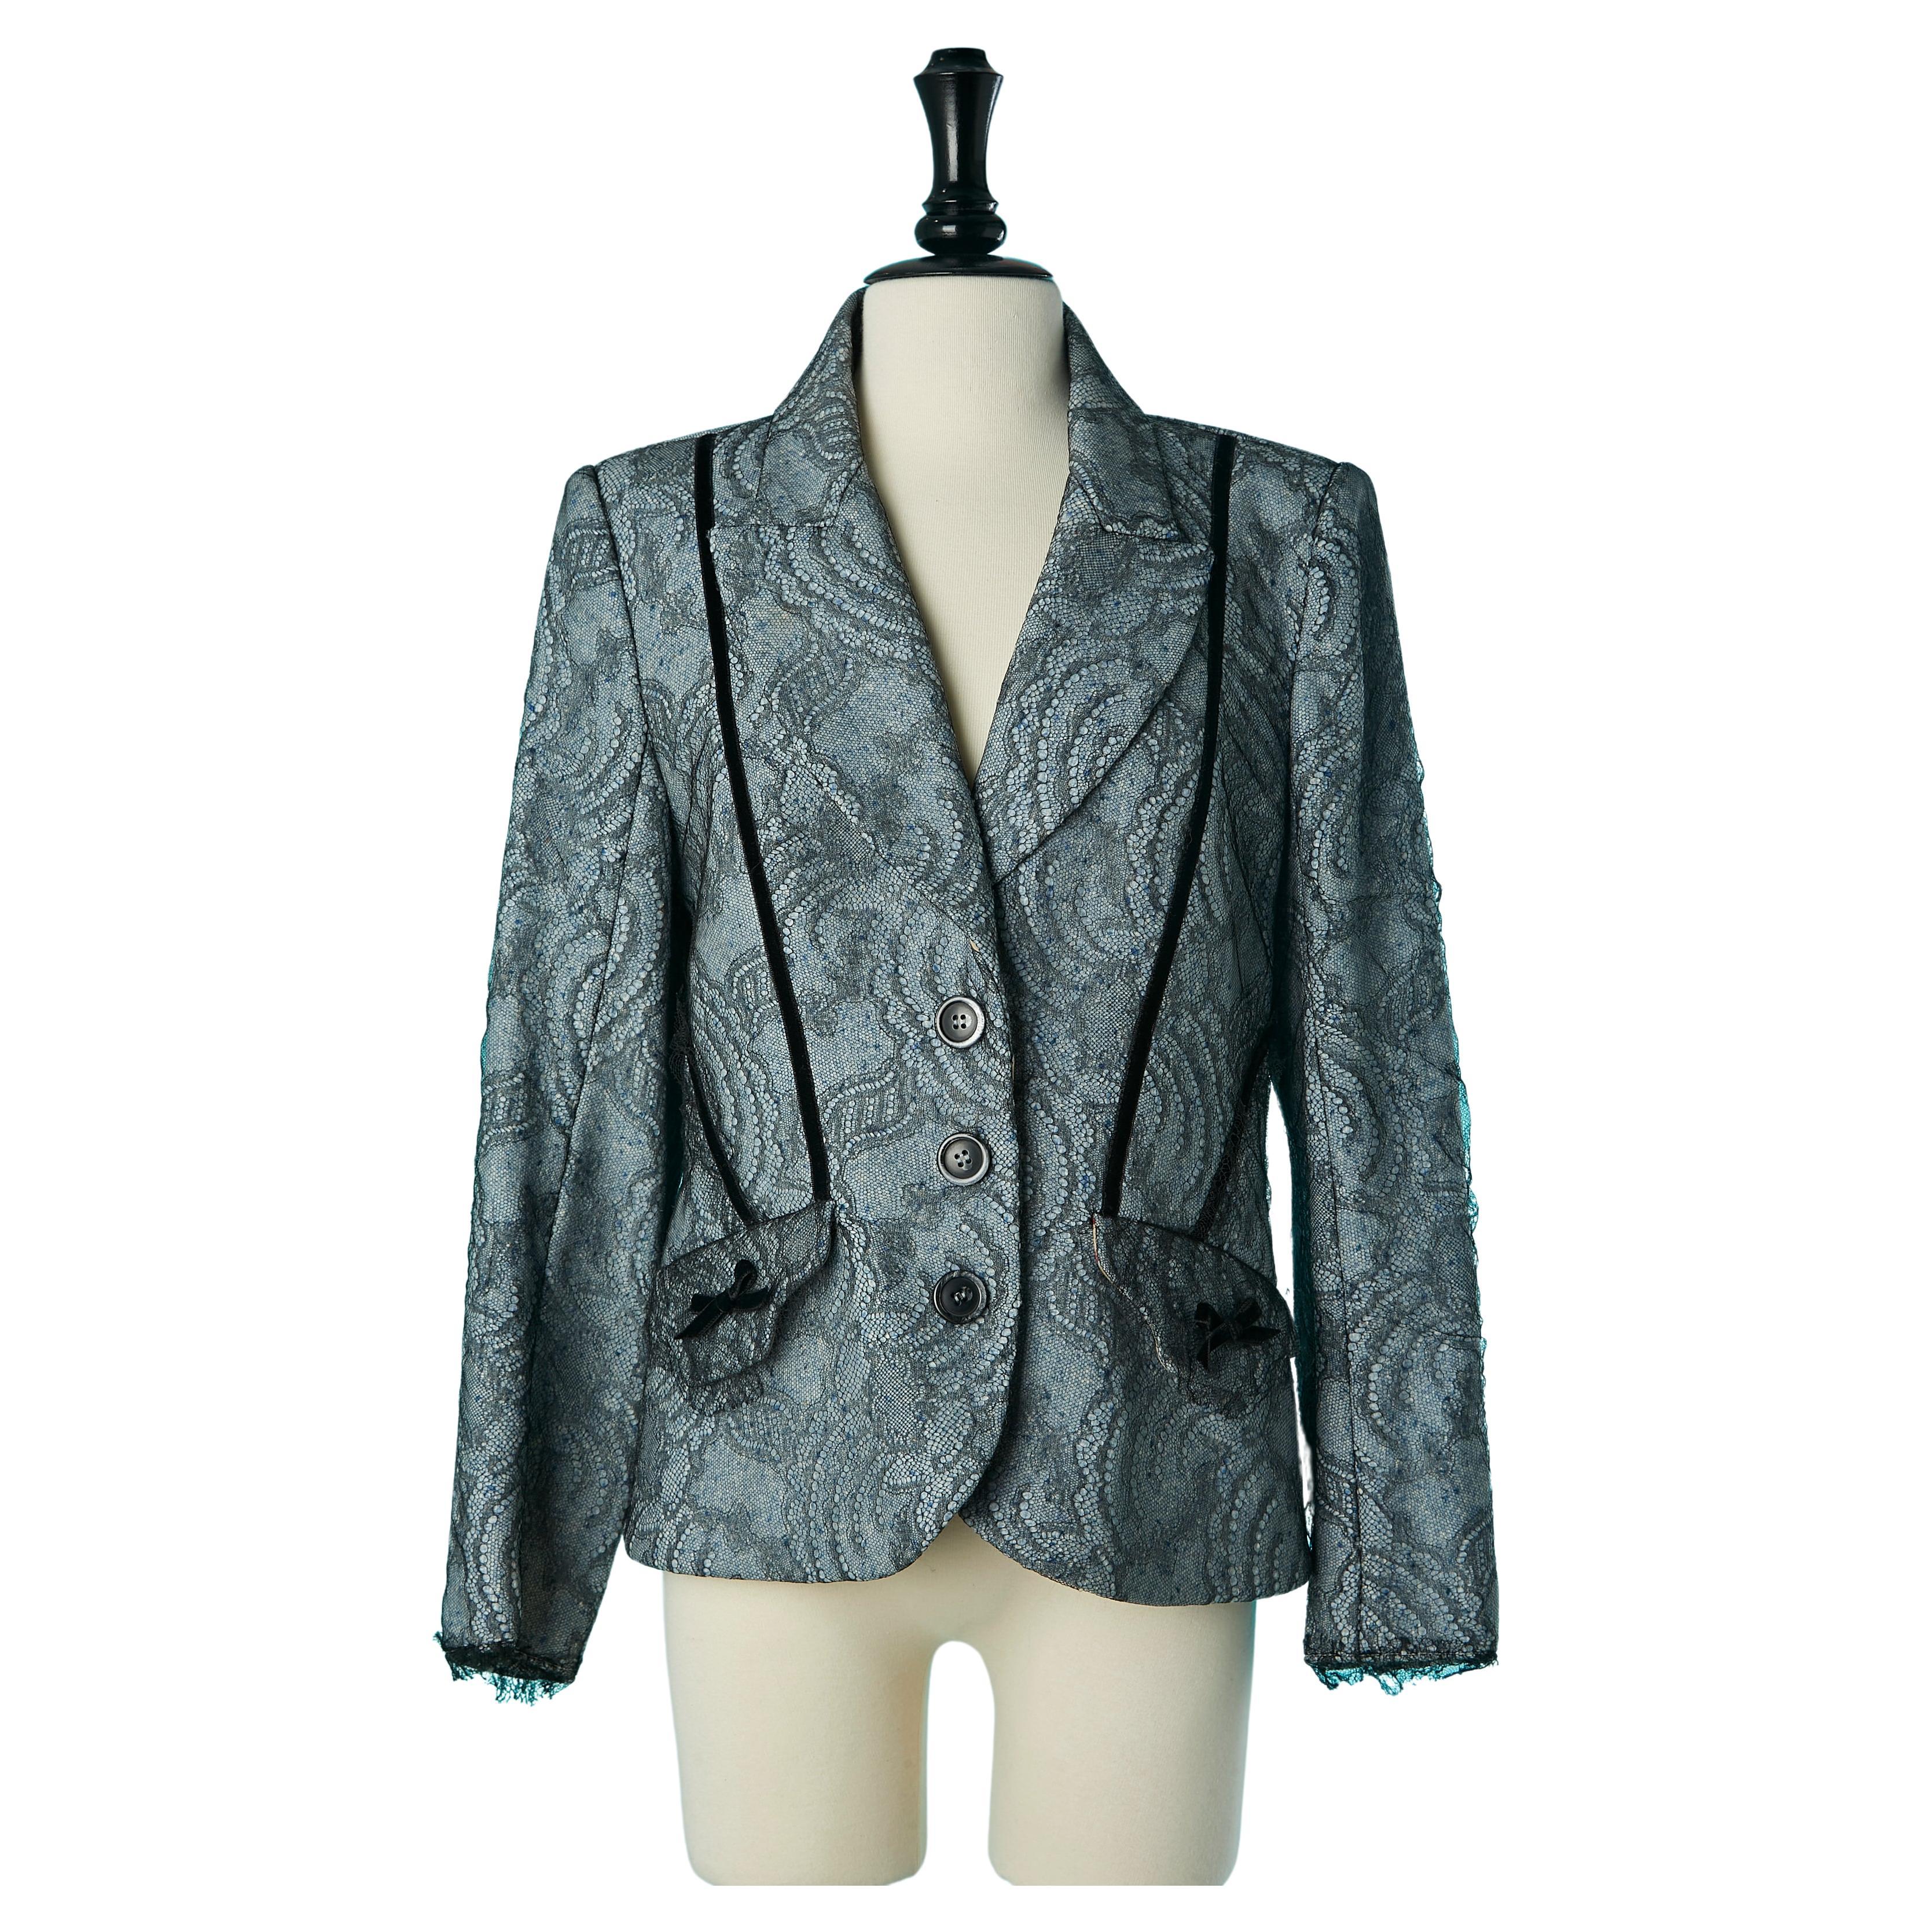 Jacket with overlay of lace on top of wool chiné lay Christian Lacroix  For Sale